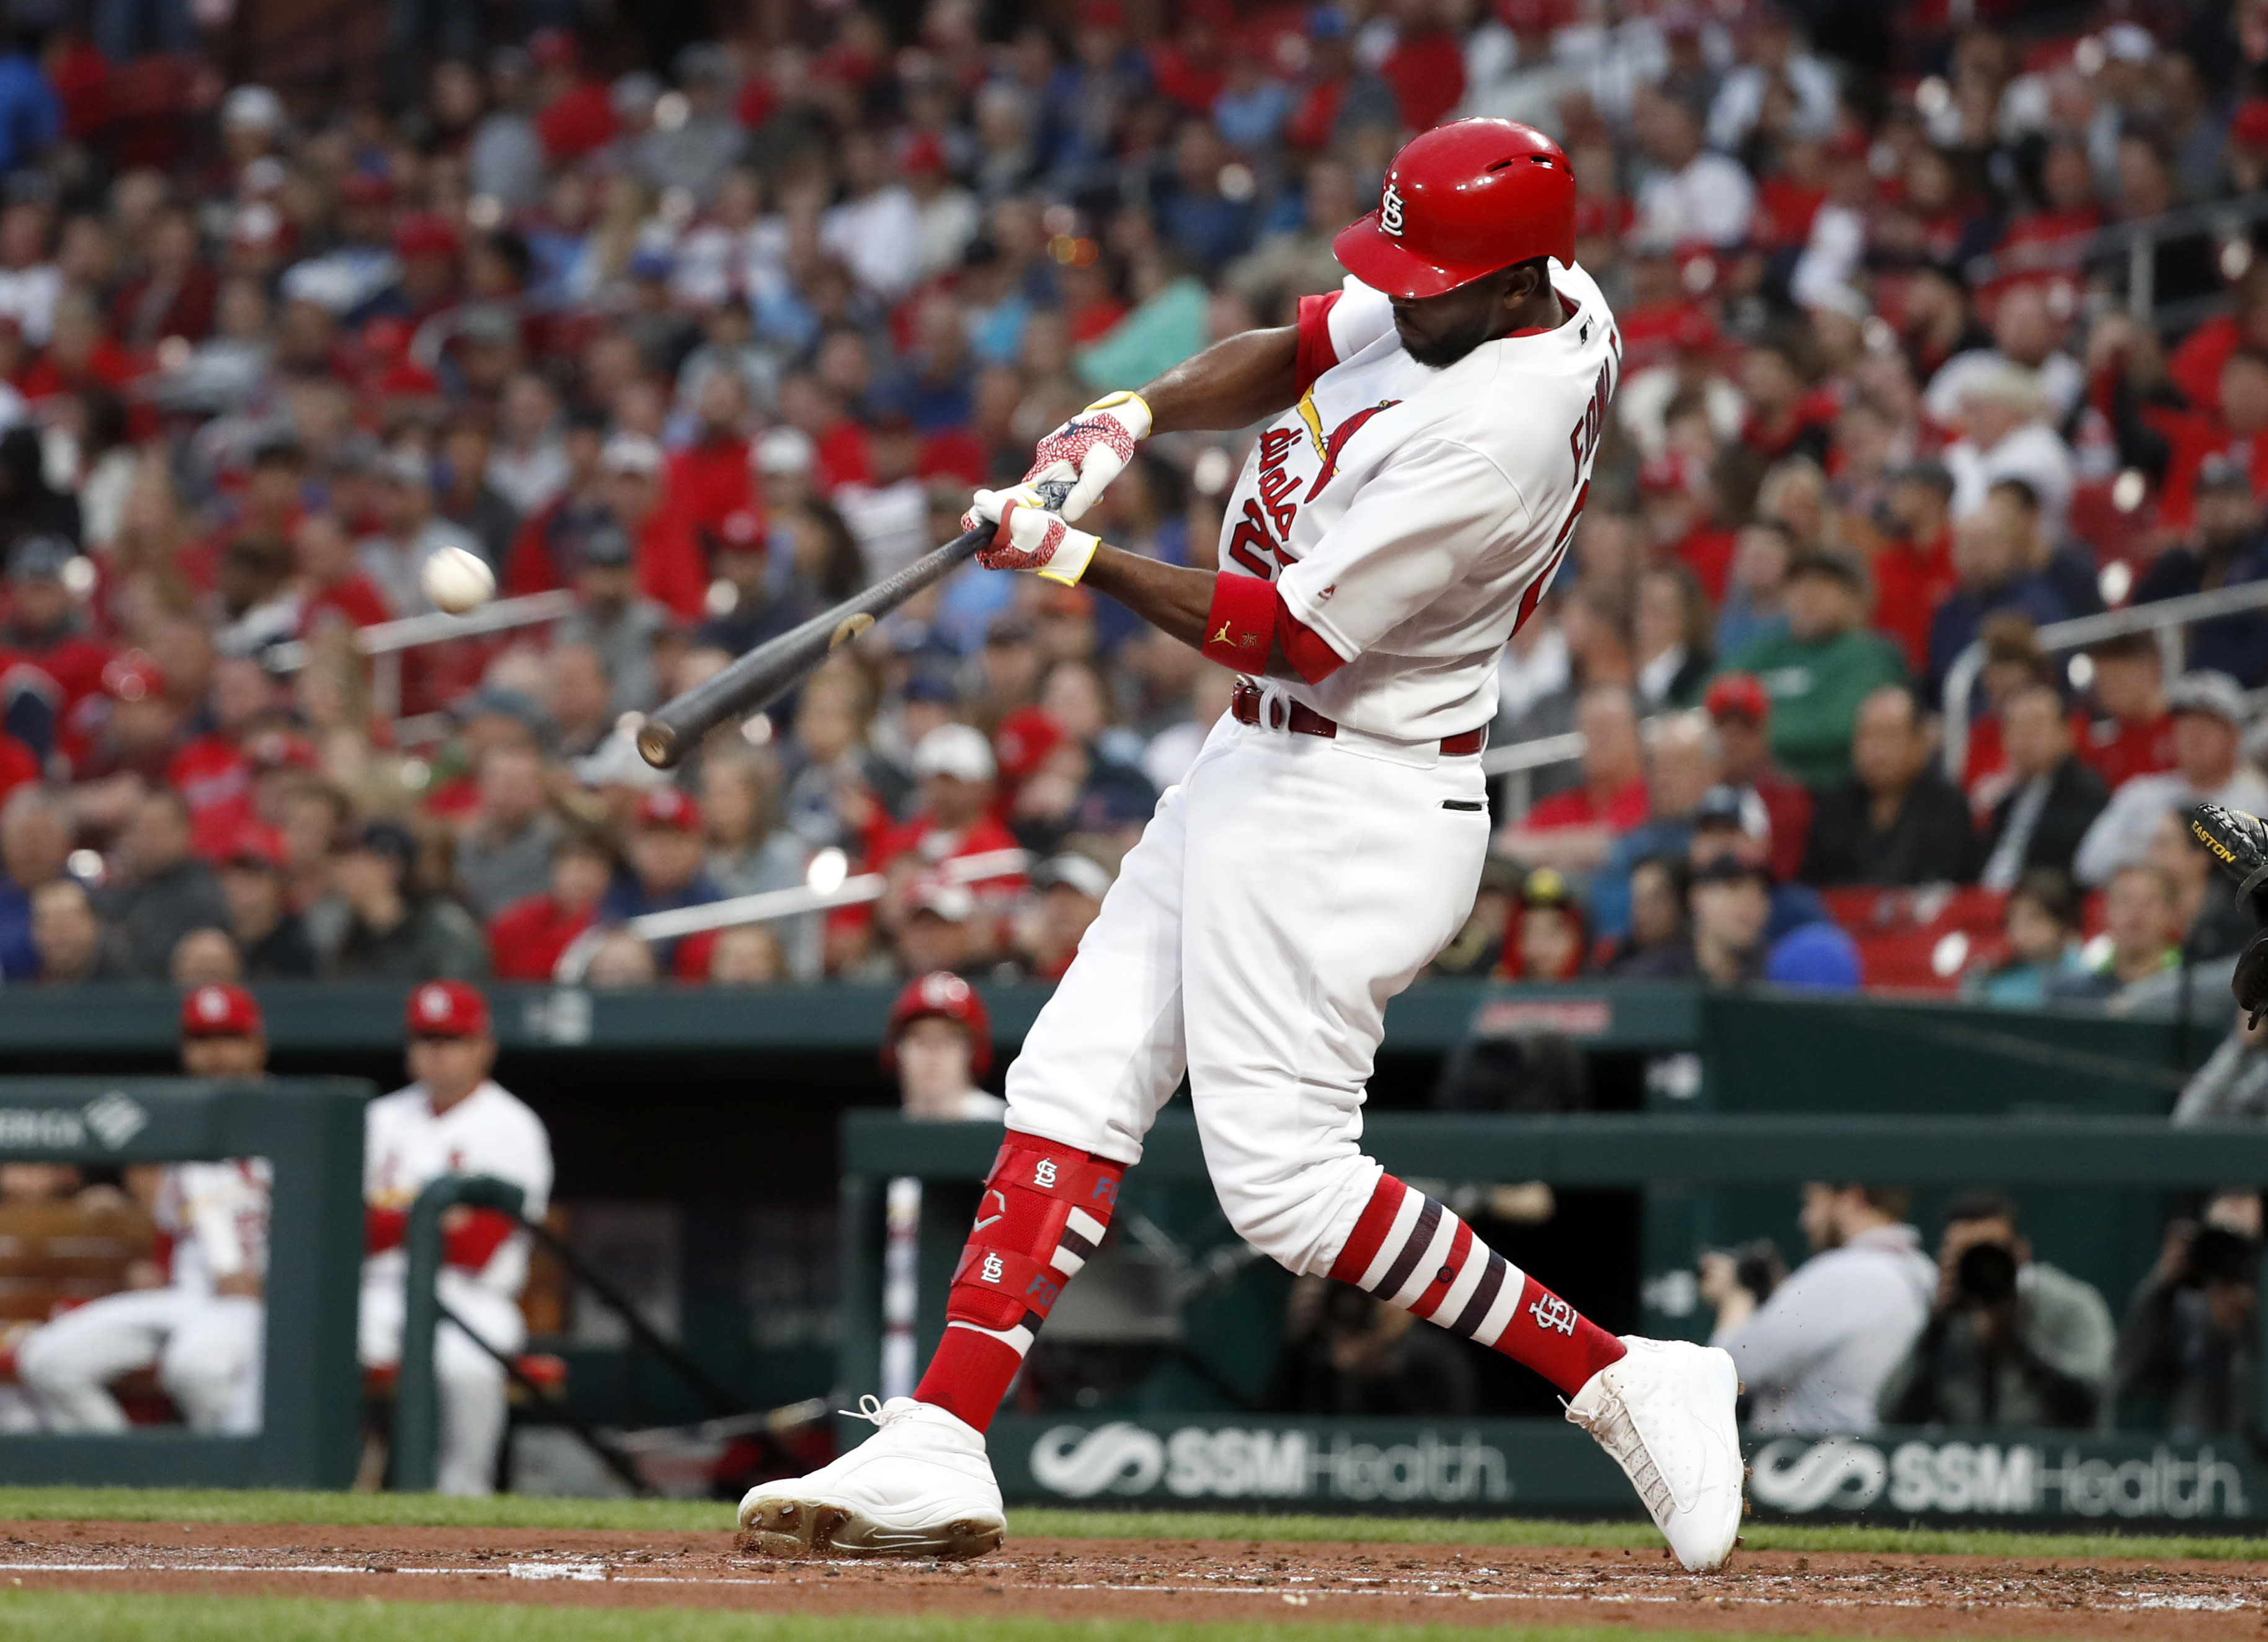 Ozuna, Fowler lead Cardinals in 17-4 rout of Pirates